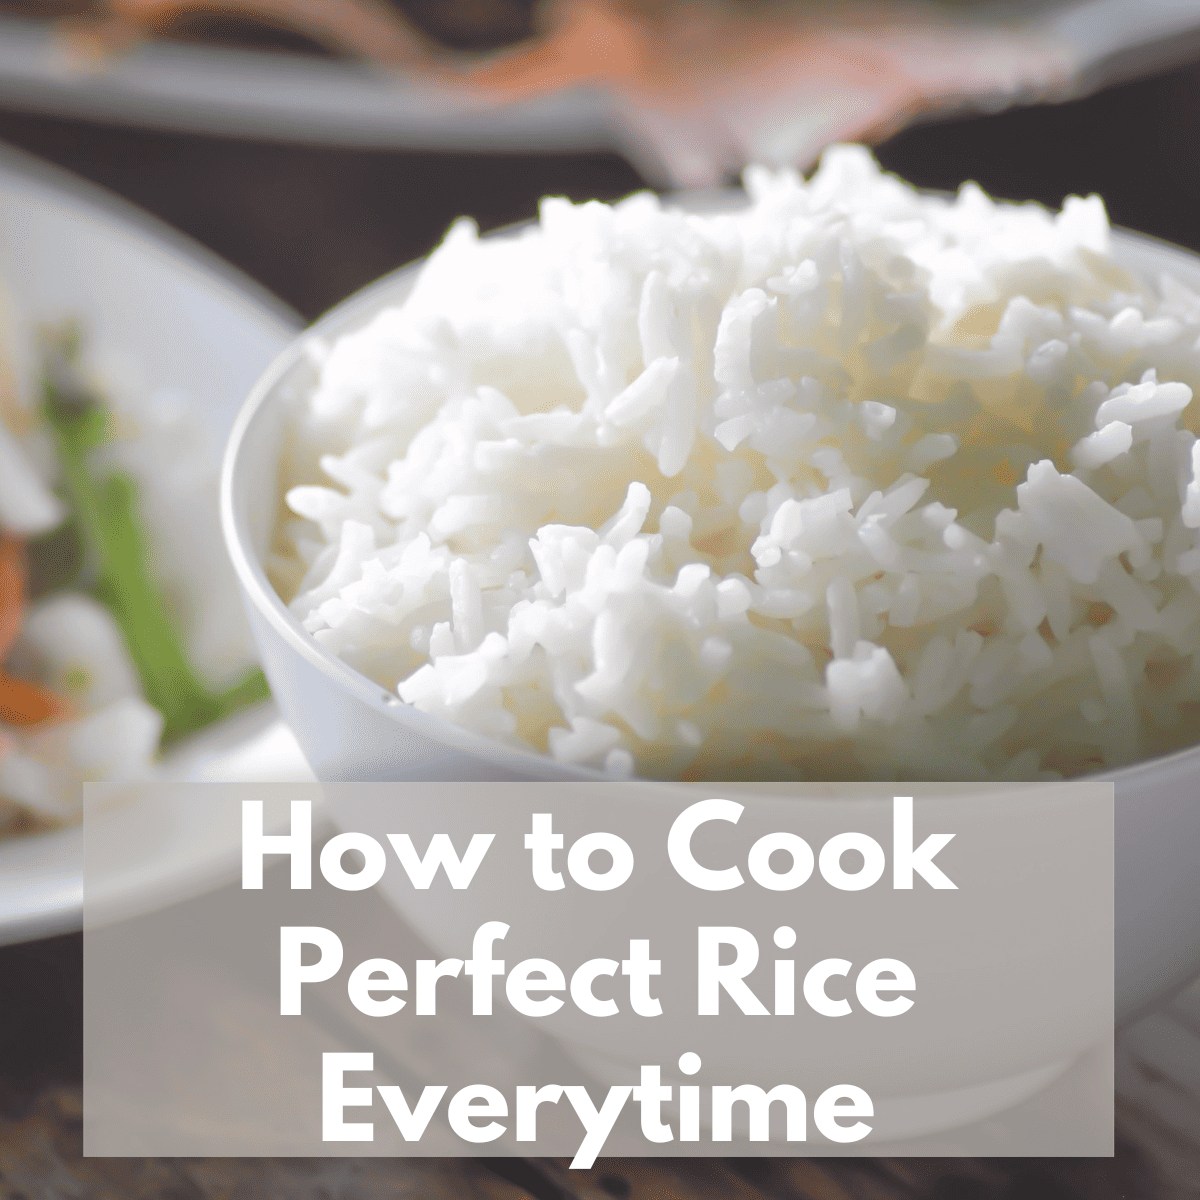 How to cook perfect rice.